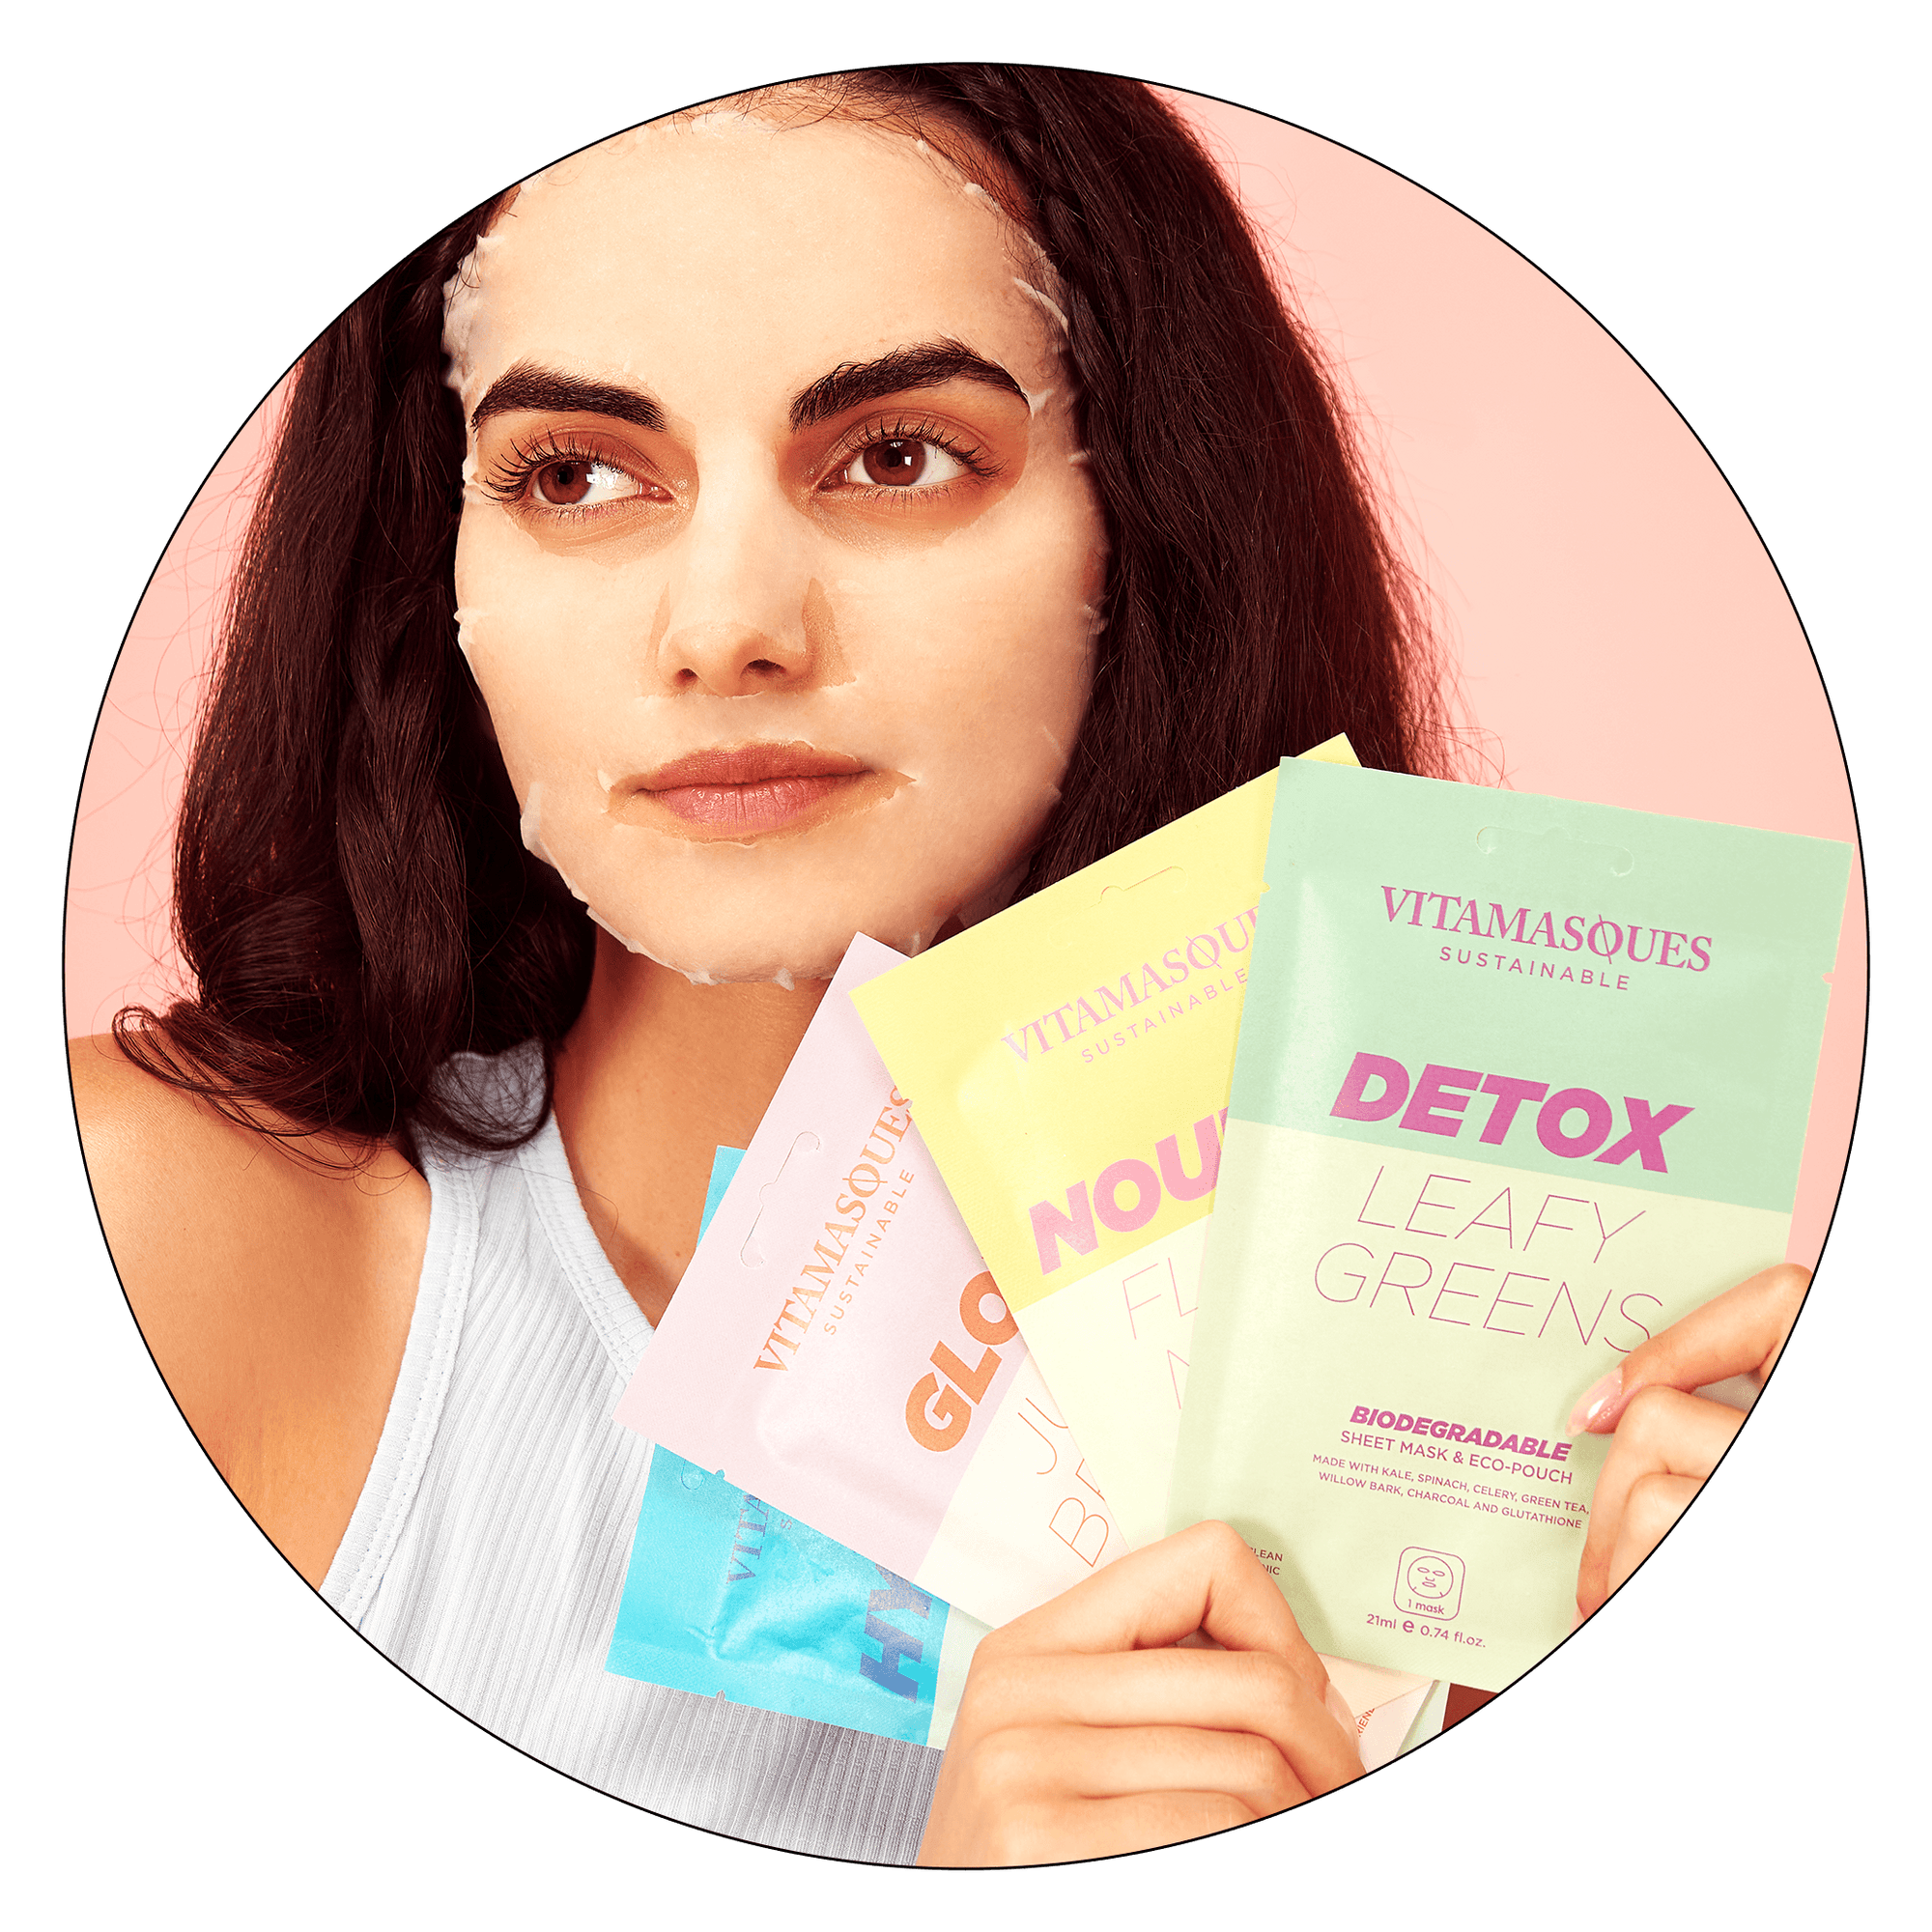 Hydrate Blue Agave Biodegradable Face Sheet Mask - Vitamasques